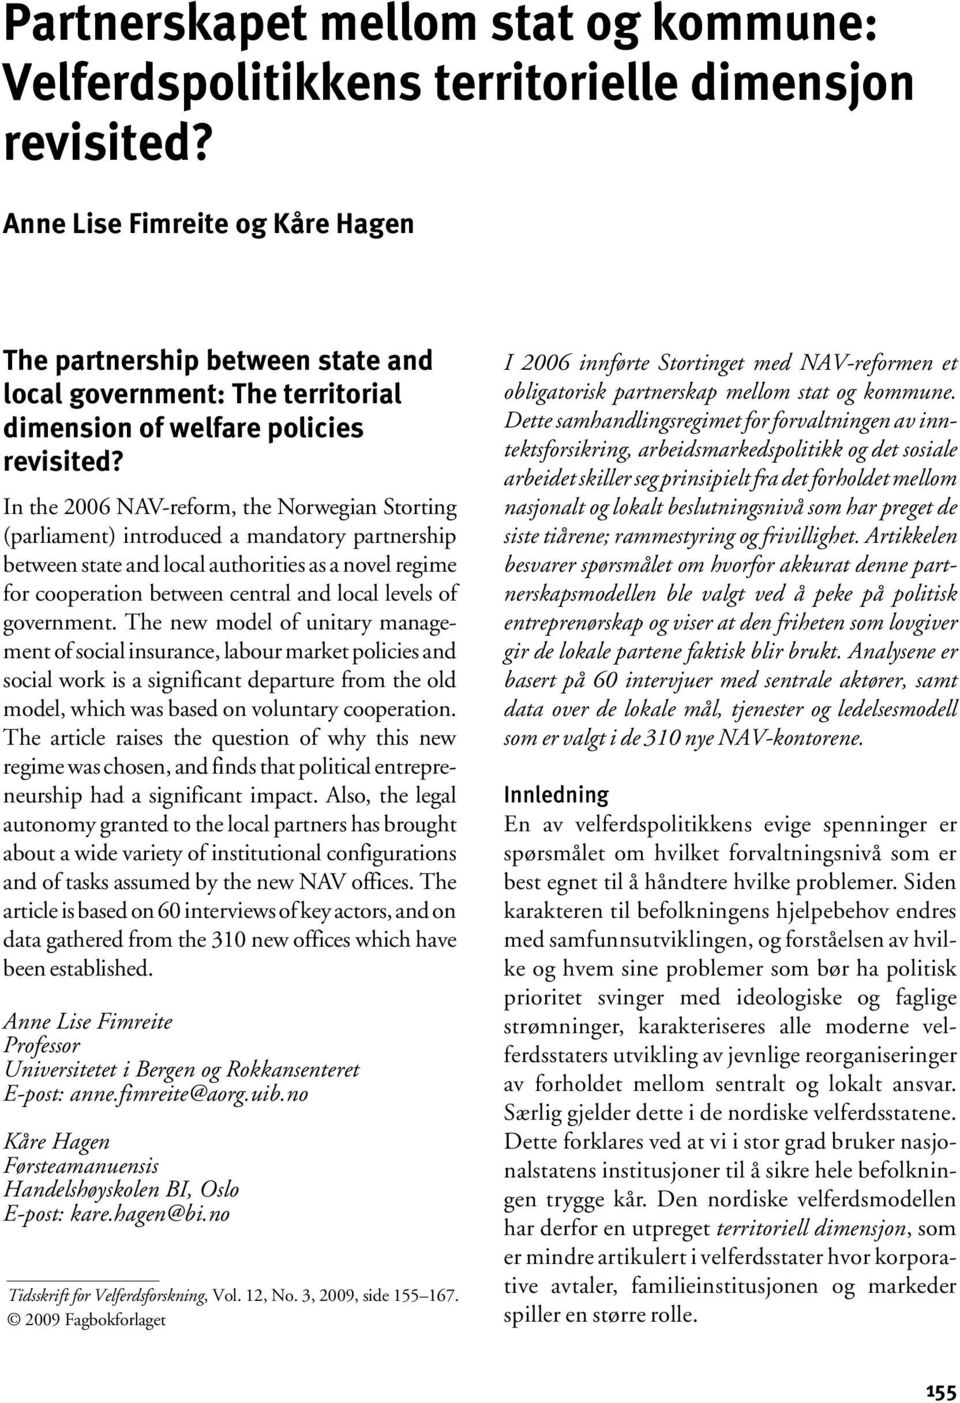 In the 2006 NAV-reform, the Norwegian Storting (parliament) introduced a mandatory partnership between state and local authorities as a novel regime for cooperation between central and local levels